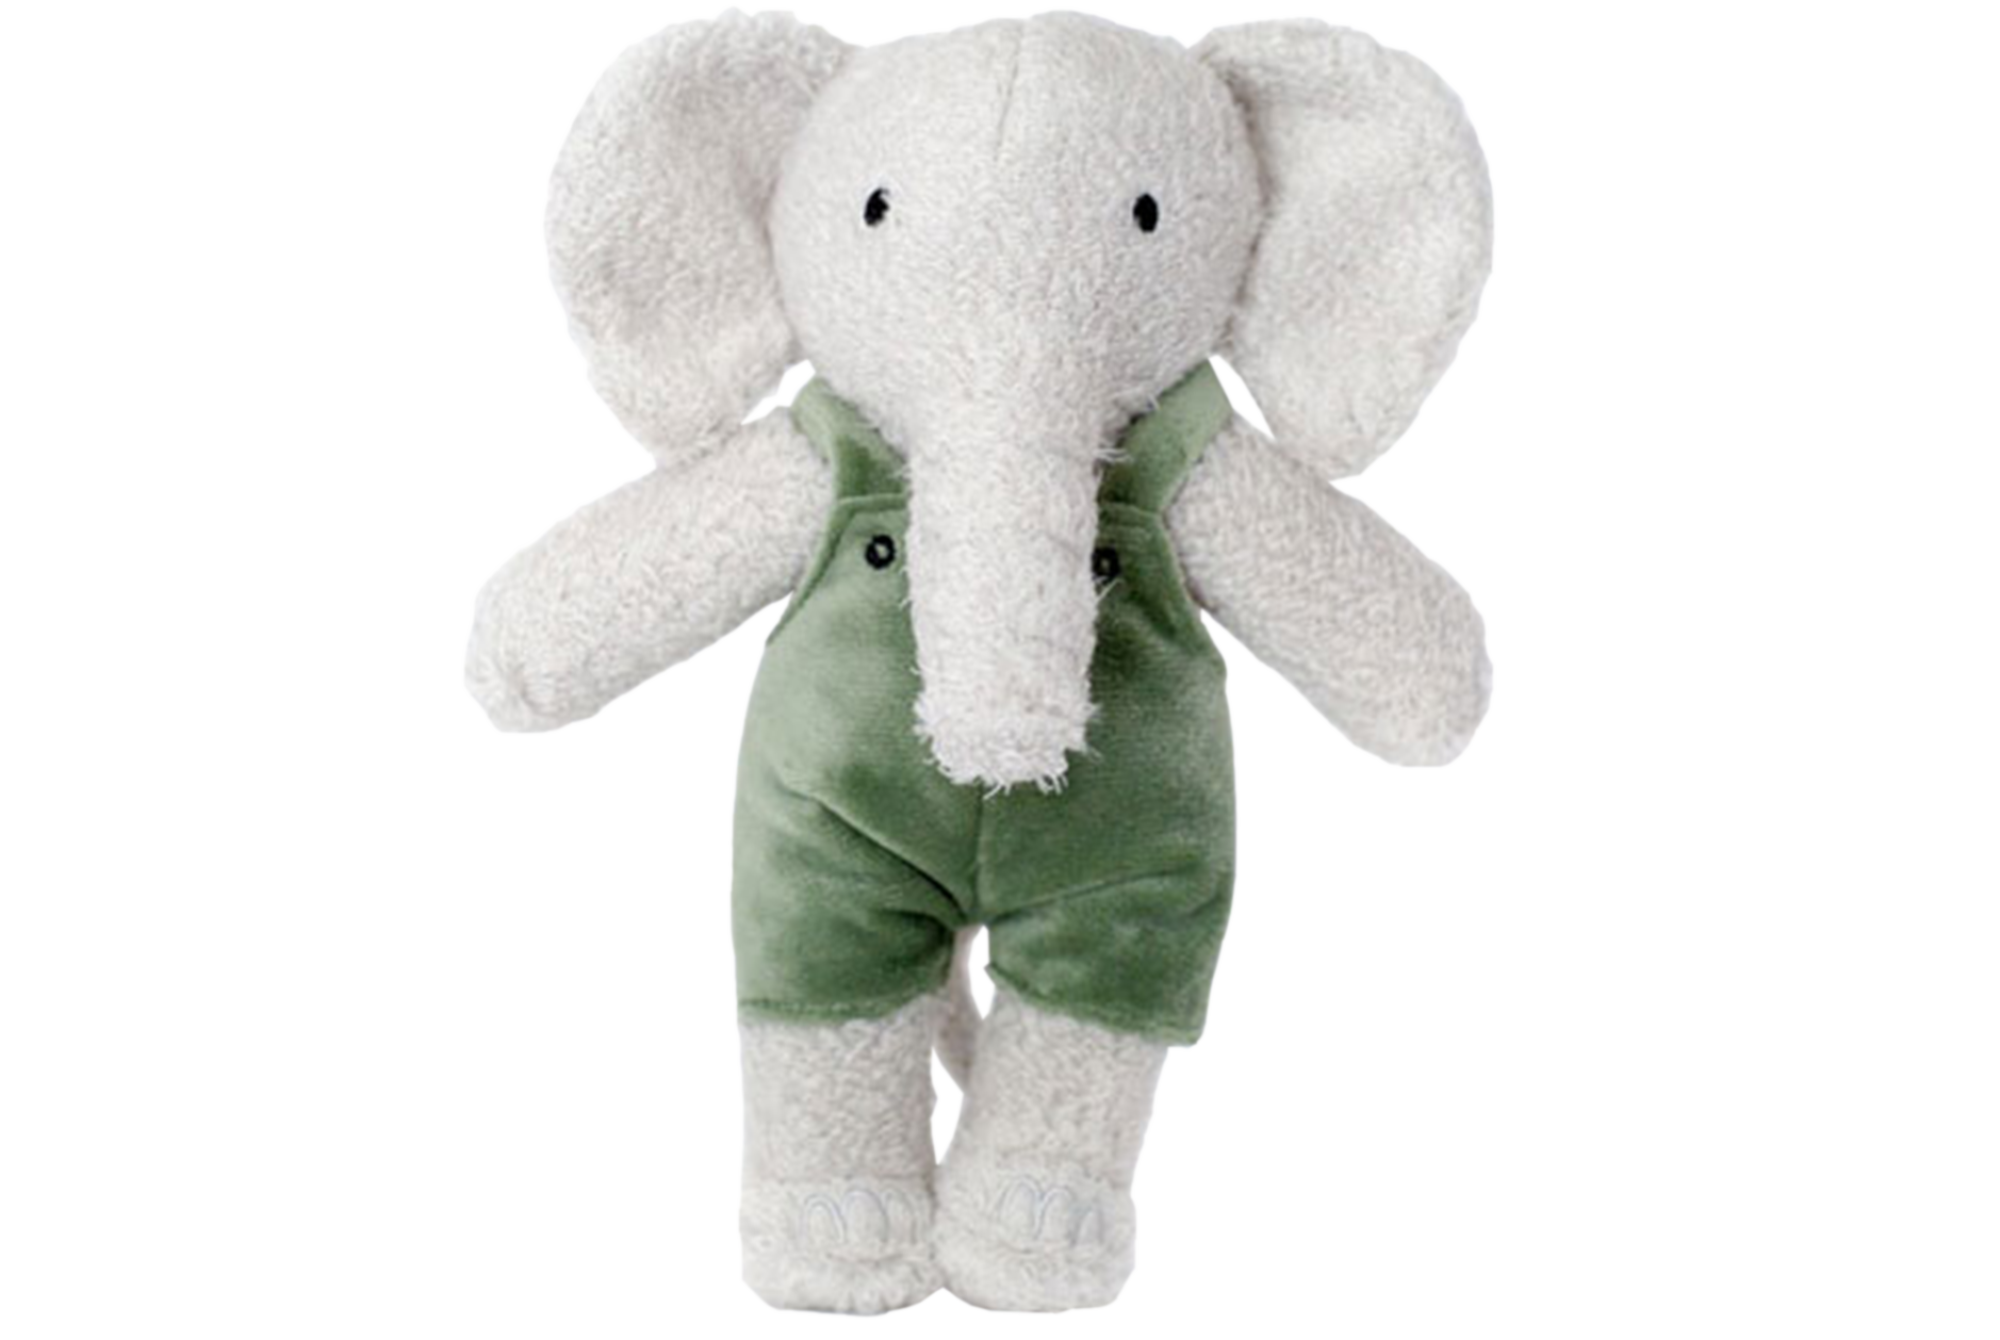 Tembo the Elephant stuffed animal from the Elephant Project